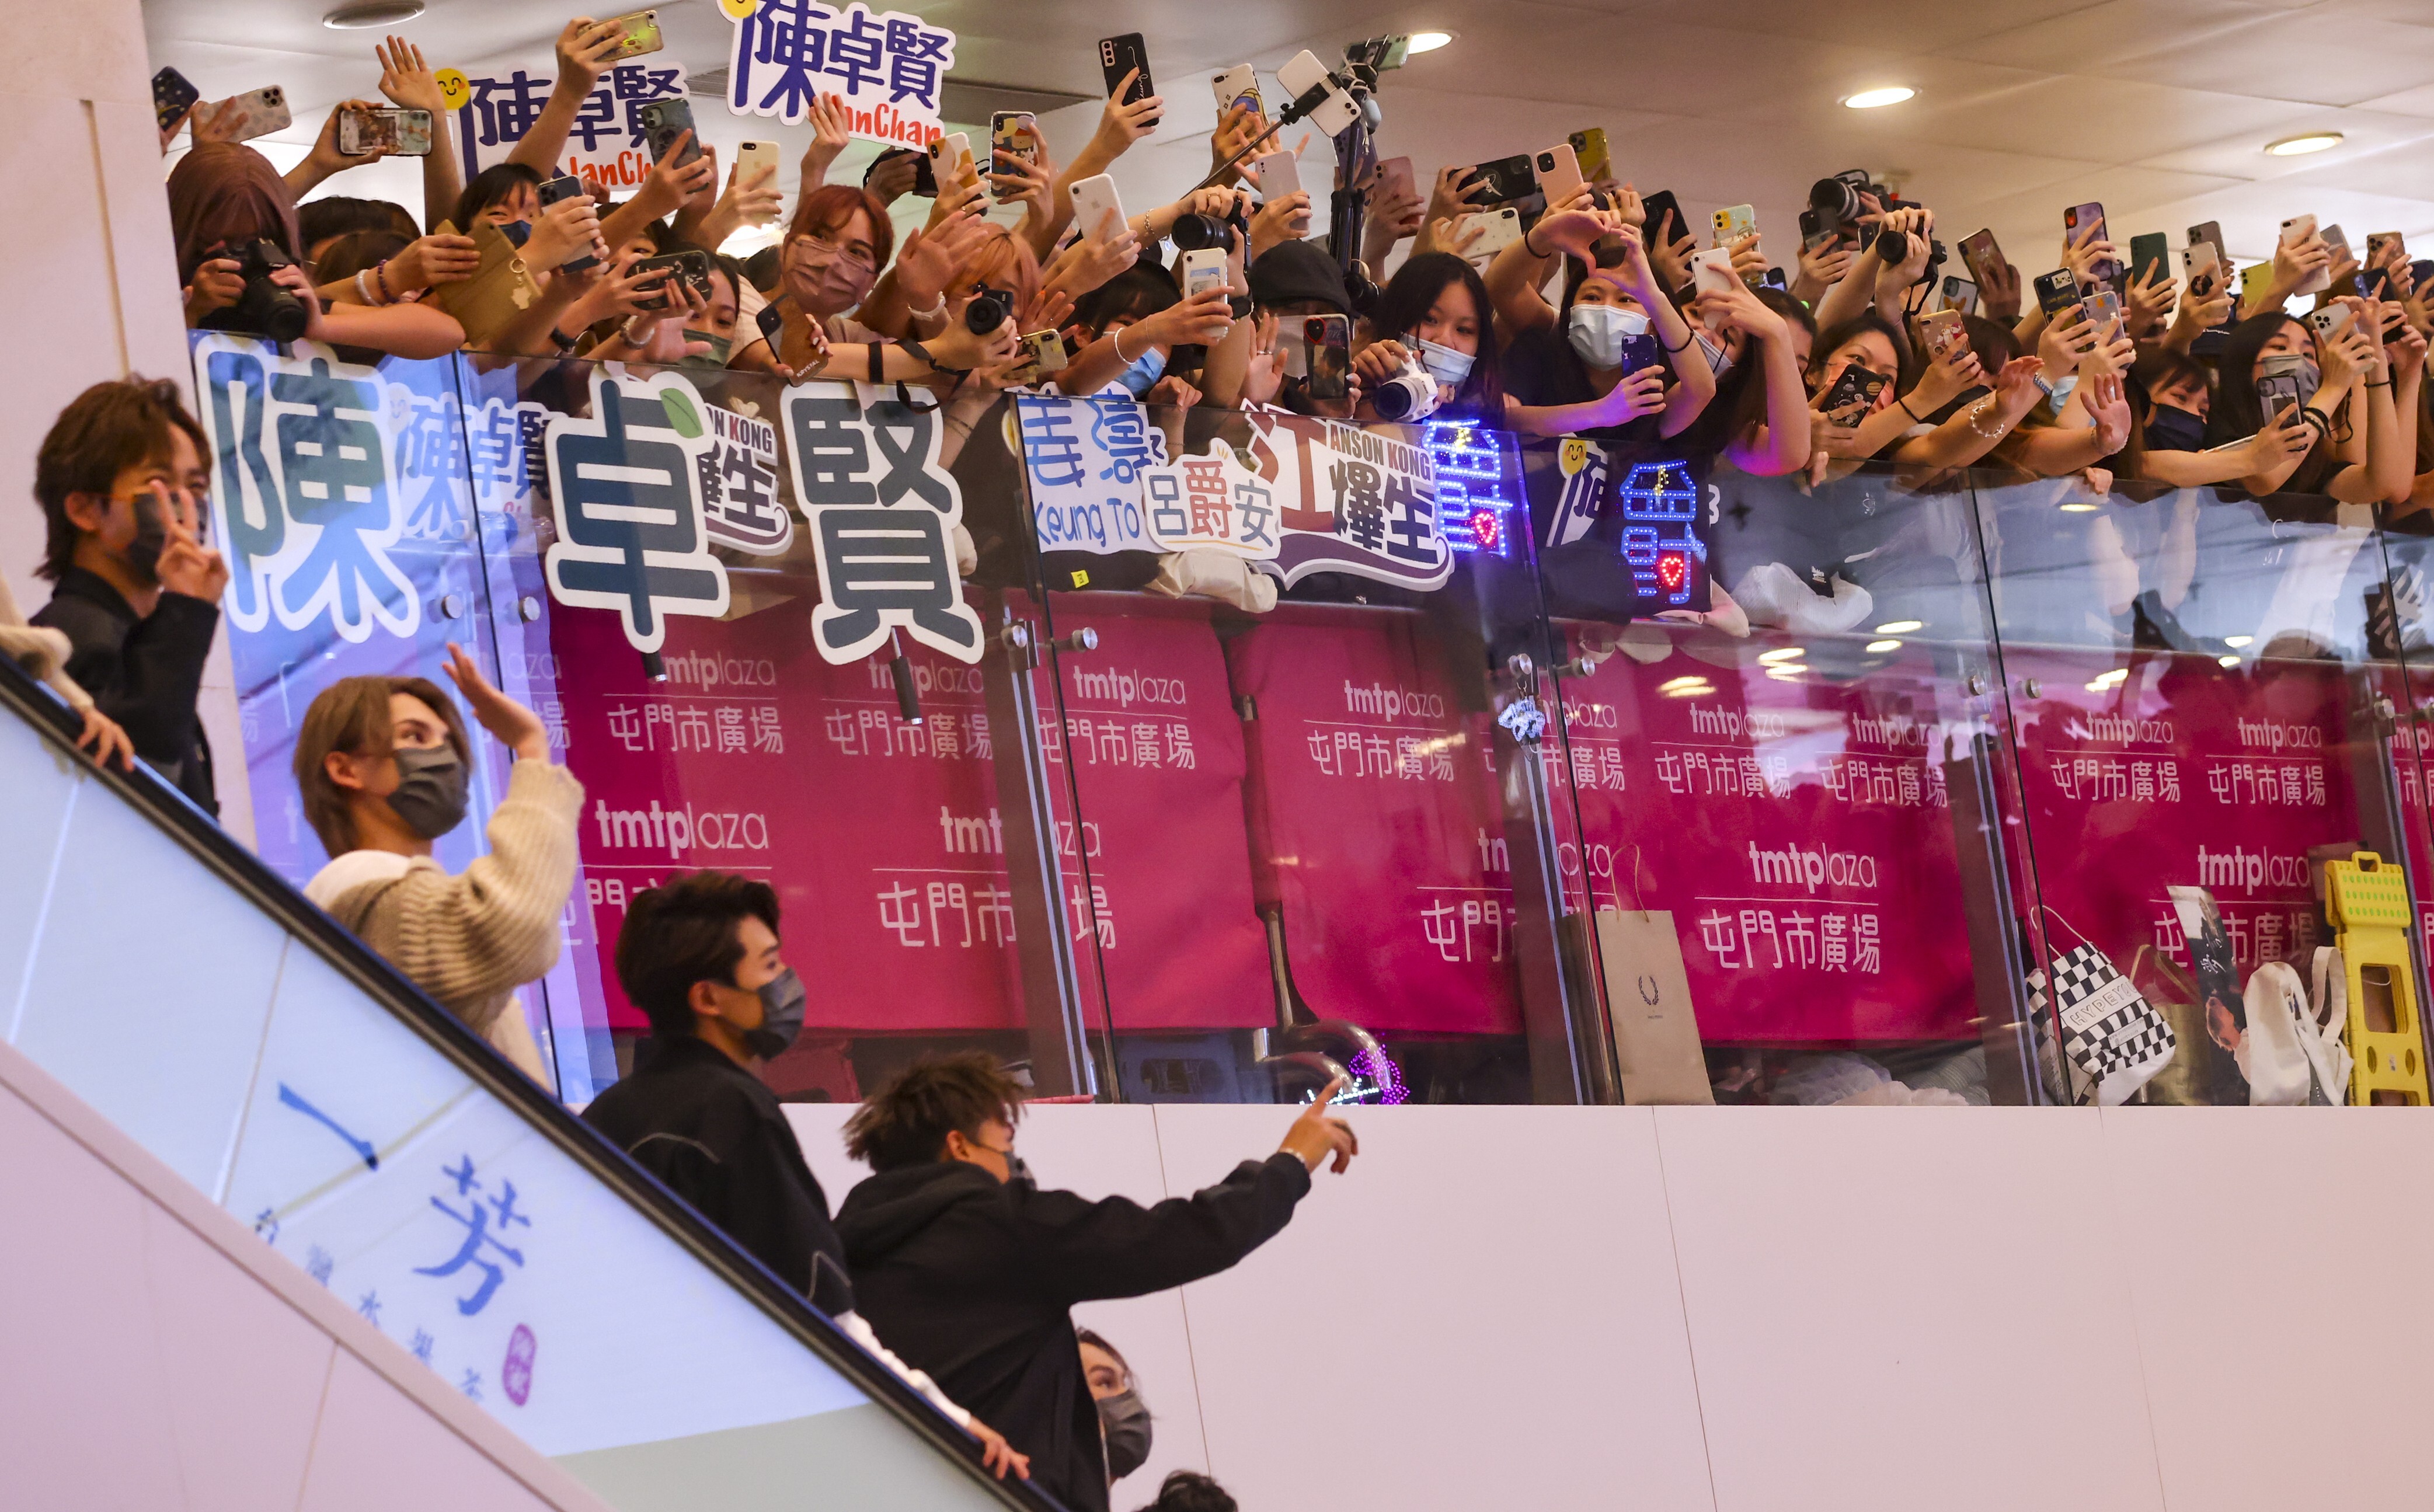 Rapturous cheers greet members of the boy bands Mirror and Error at a New Territories shopping centre. Photo: Dickson Lee